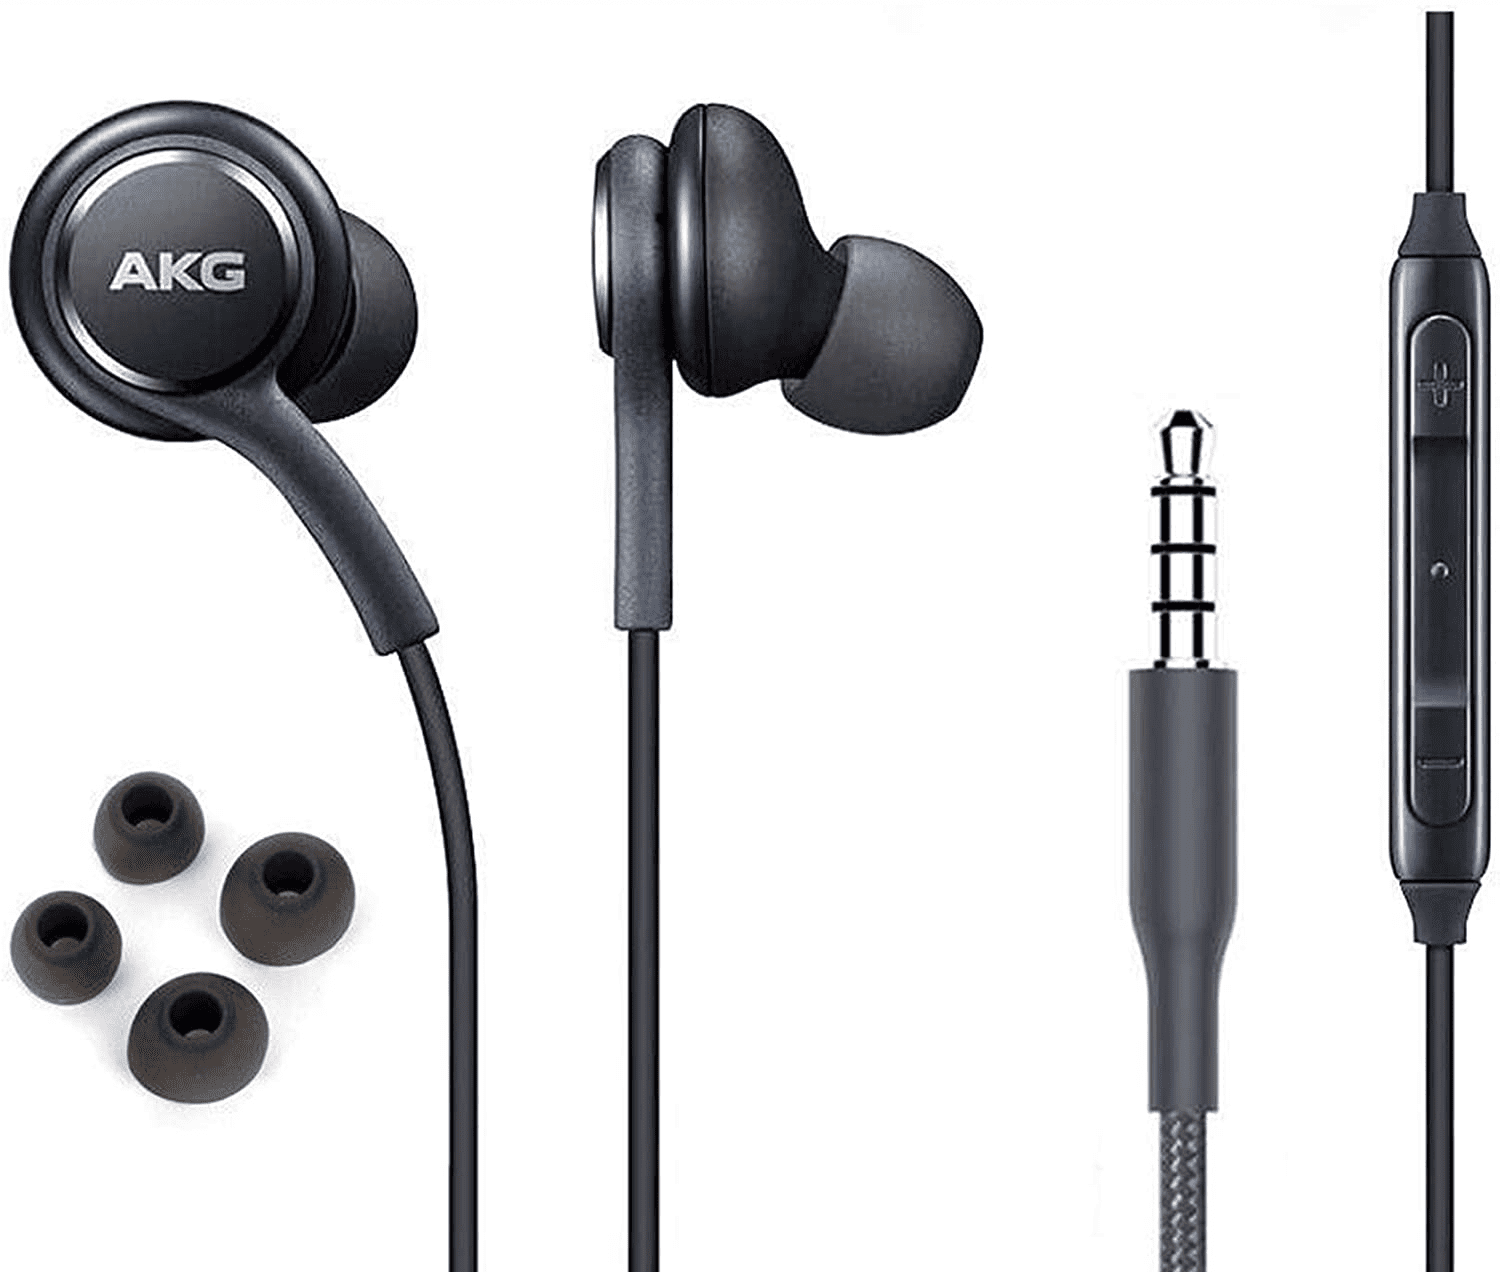 B.C. Panorama artikel OEM InEar Earbuds Stereo Headphones for Huawei Ascend G510 Plus Cable -  Designed by AKG - with Microphone and Volume Buttons (Black) - Walmart.com